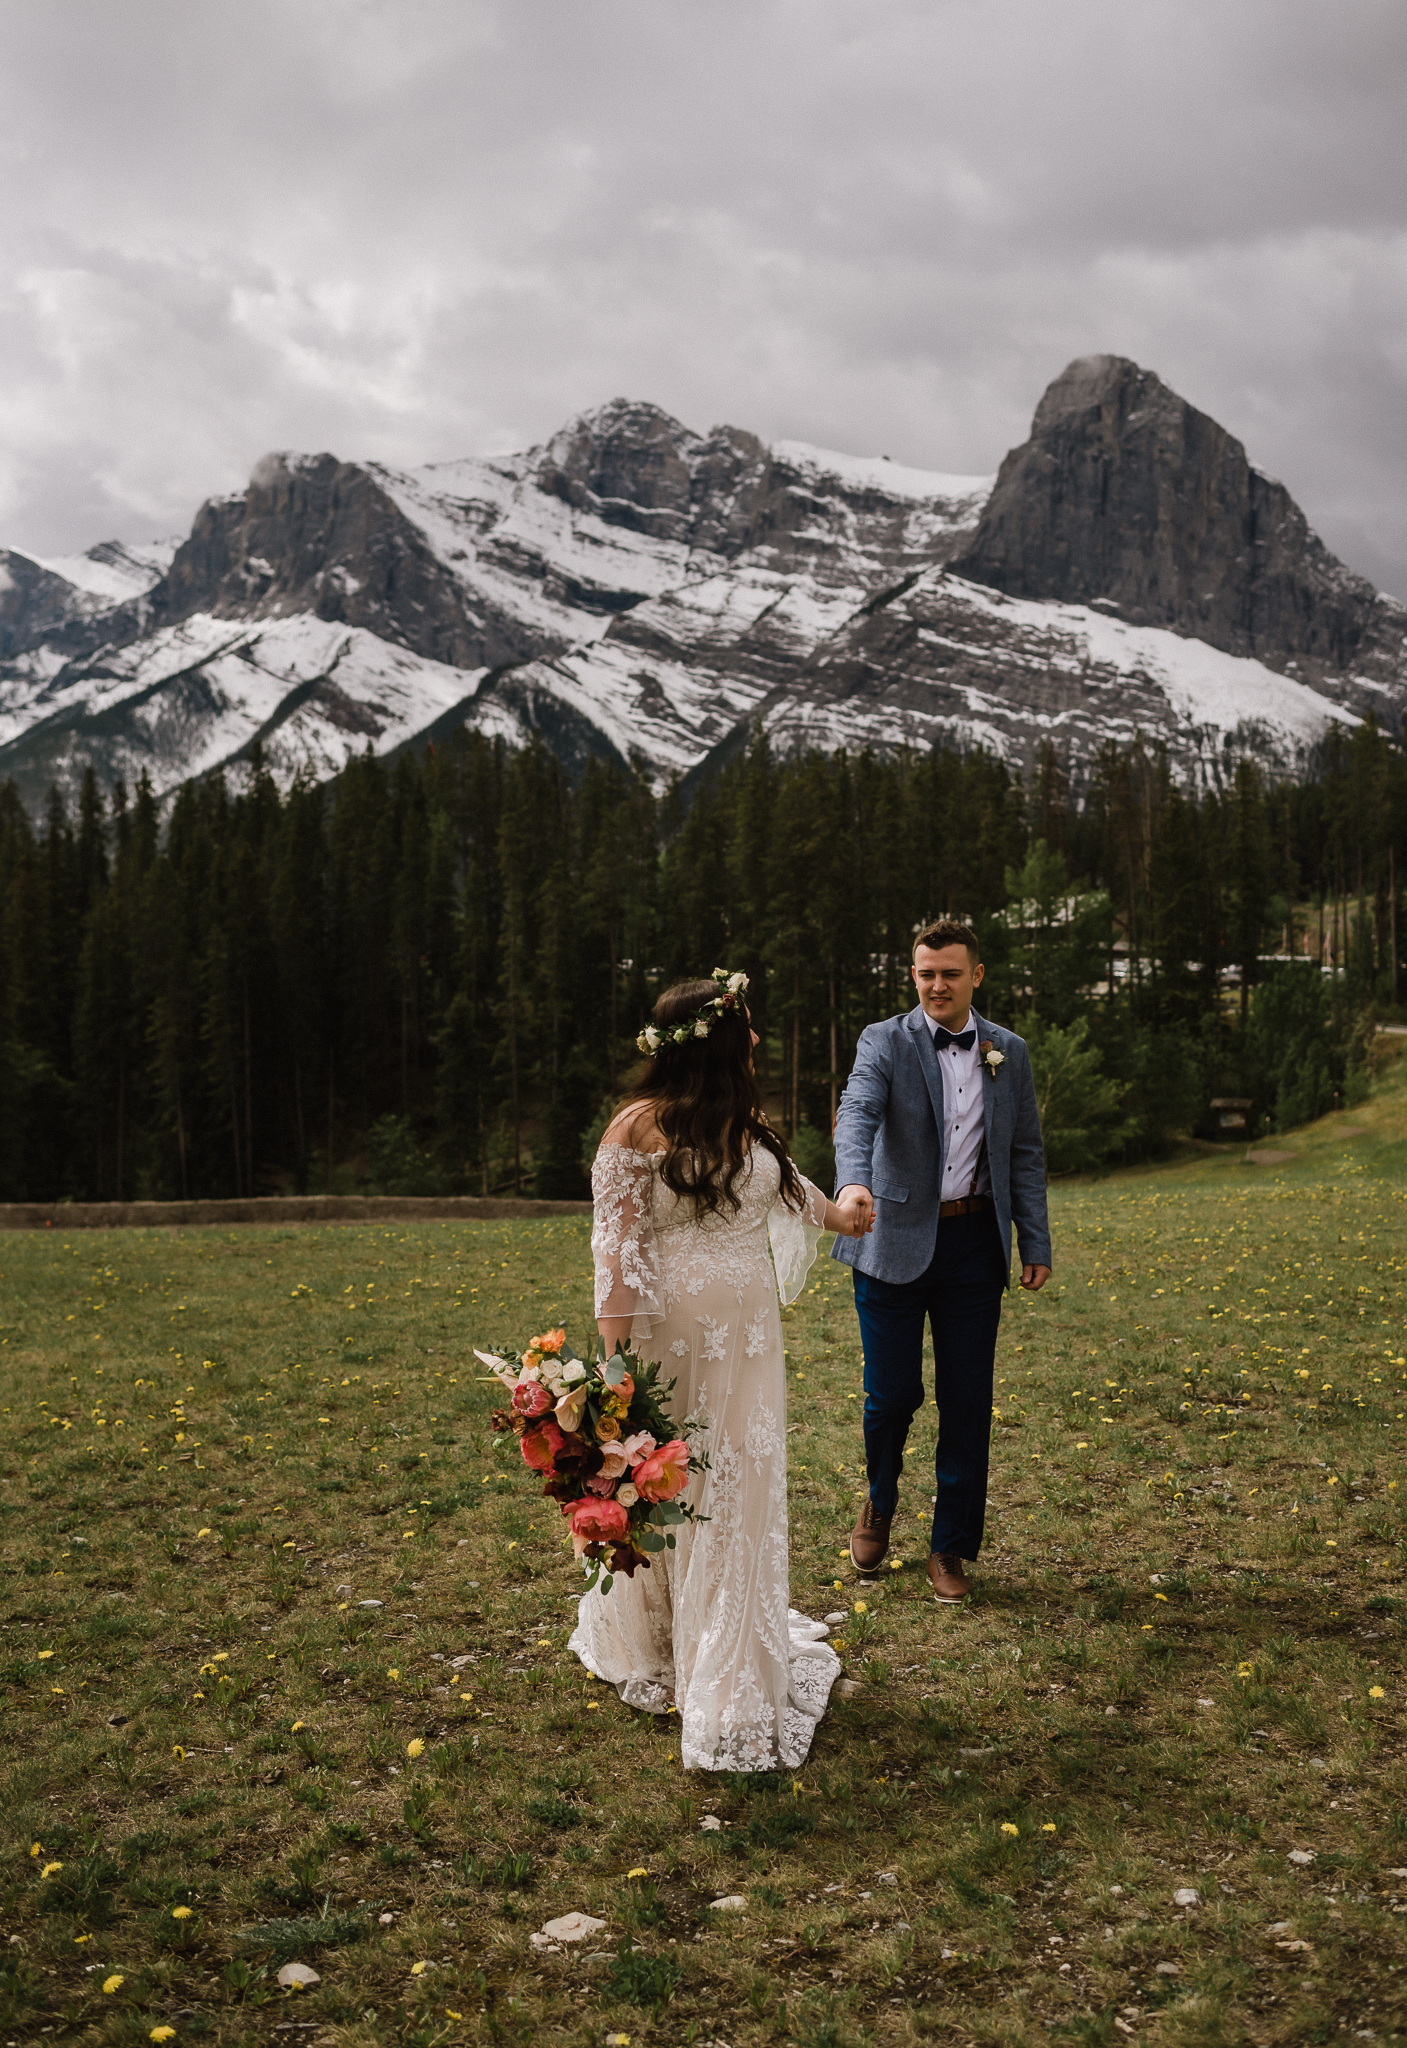 Bride pulling groom towards her at the Nordic Center, Canmore